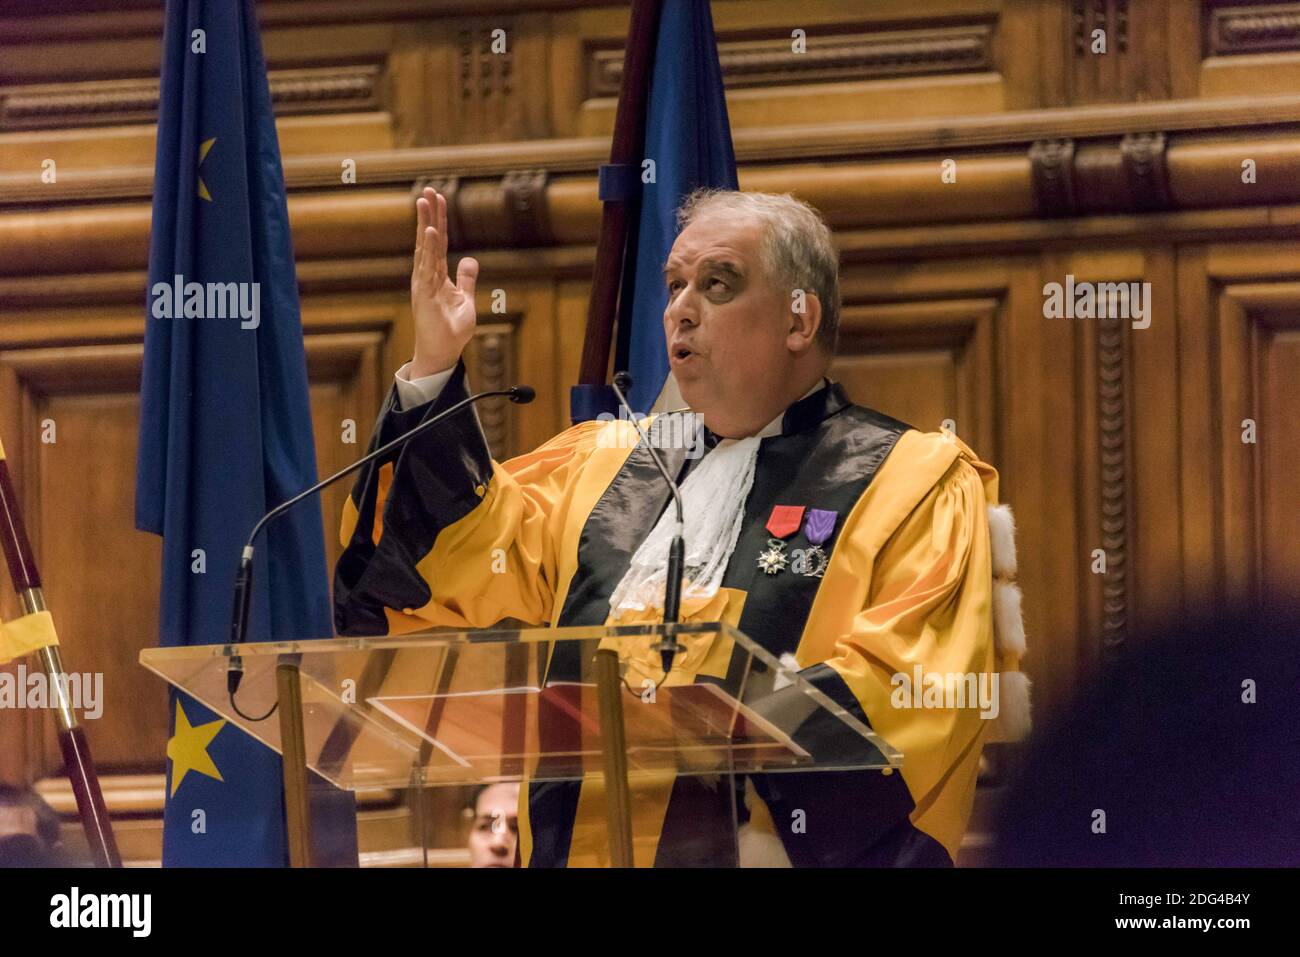 Professor Barthelemy Jobert, President of the University of Paris-Sorbonne, at a ceremony to award the insignia of Doctor Honoris Causa to the President of the Federal Republic of Germany, Joachim Gauck, at the Grand Amphitheater de la Sorbonne Of the invitation of honor of France to the Frankfurt Book Fair 2017, Paris, France, January 26, 2017. Photo by Samuel Boivin / ABACAPRESS.COM Stock Photo